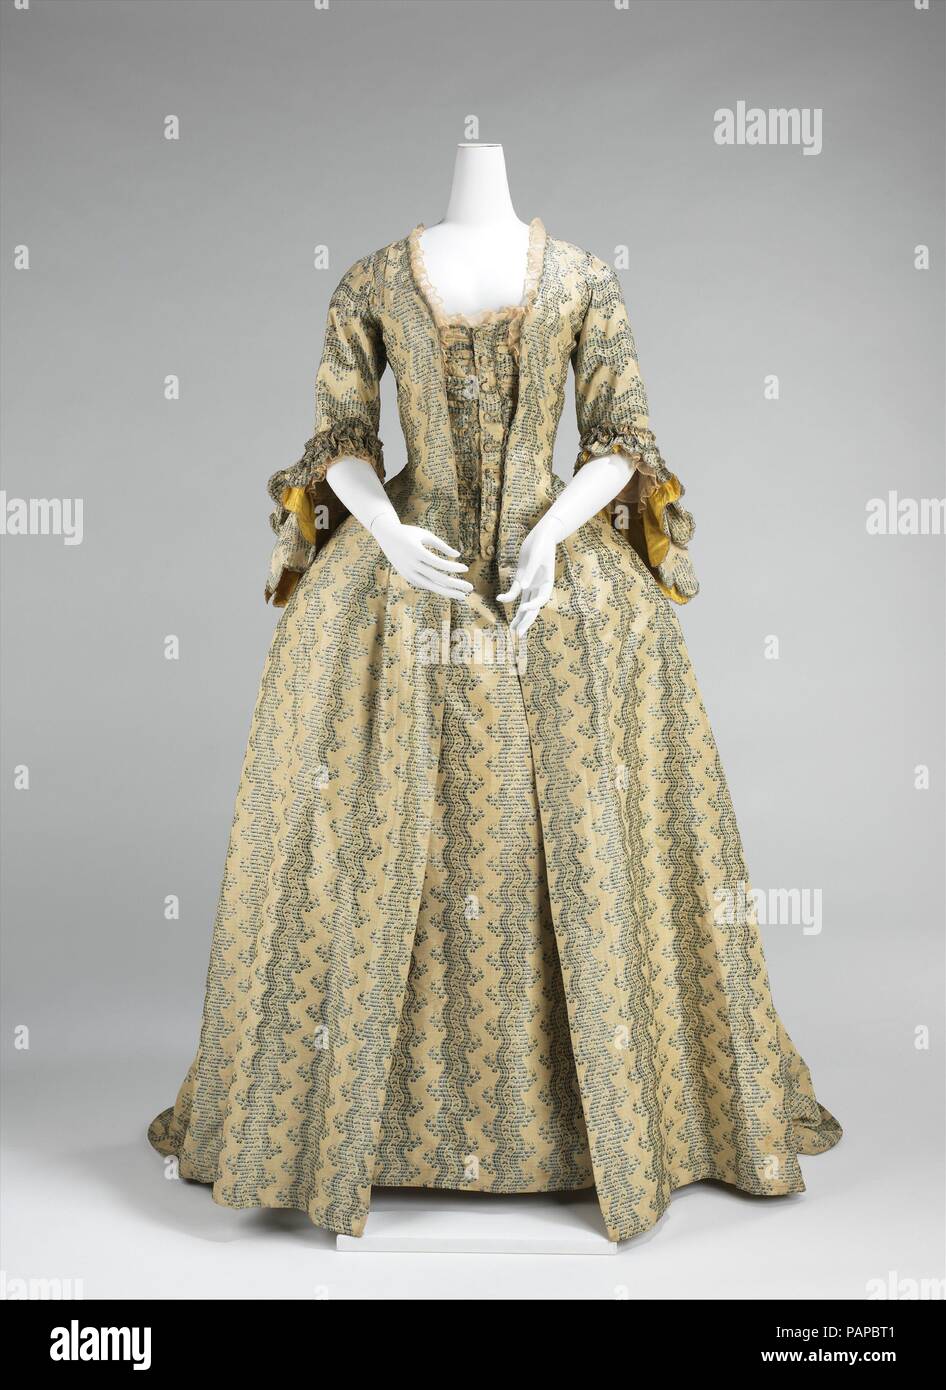 Robe à la Française. Culture: French. Date: 1760-70. Women with coquettish  airs were imposing in robes à la française and robes à l'anglaise  throughout the period between 1720 and 1780. The robe